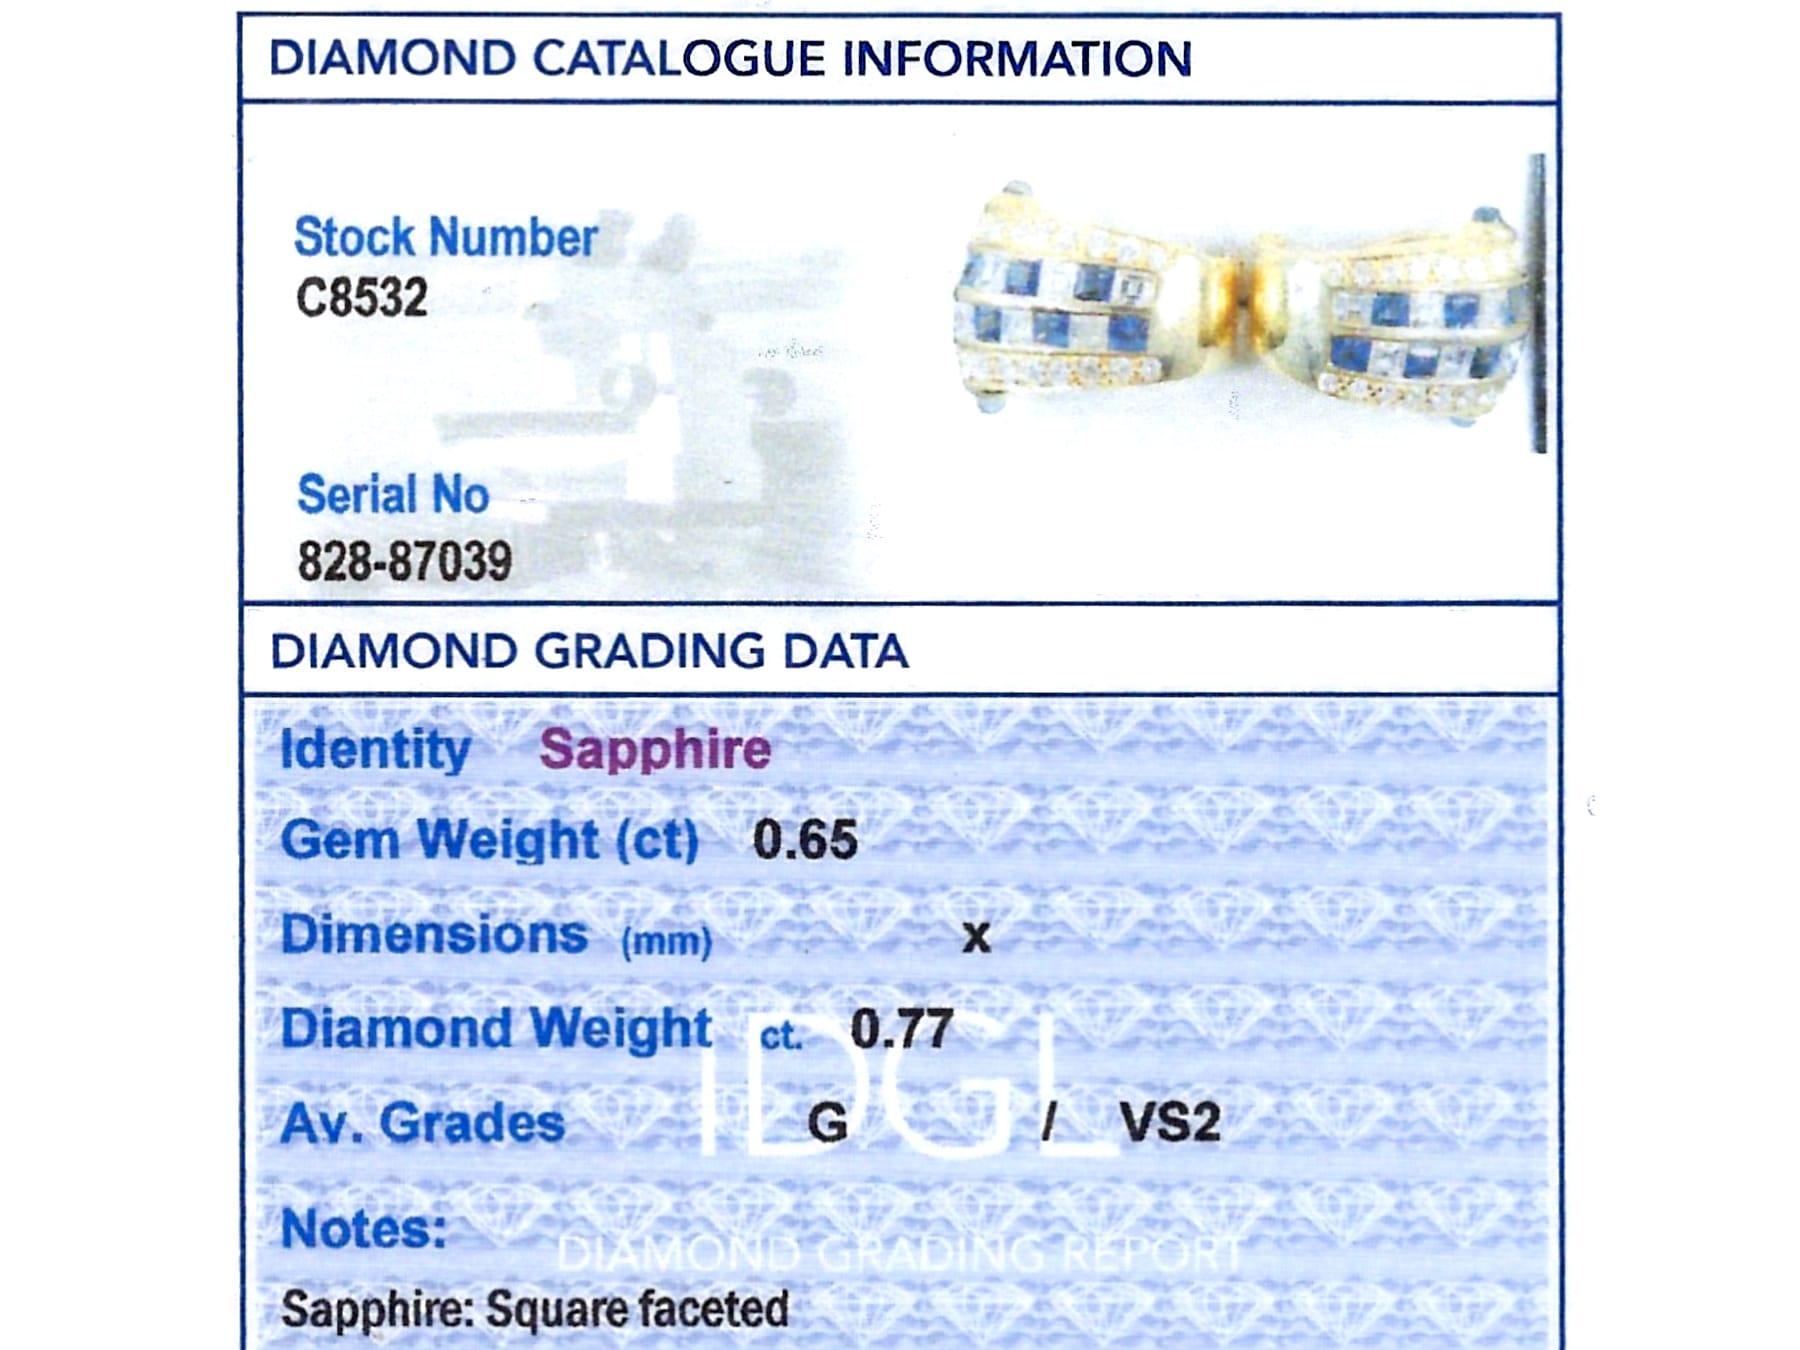 Vintage 0.65Ct Sapphire and 0.77Ct Diamond, 18k Yellow Gold Earrings 1988 For Sale 5